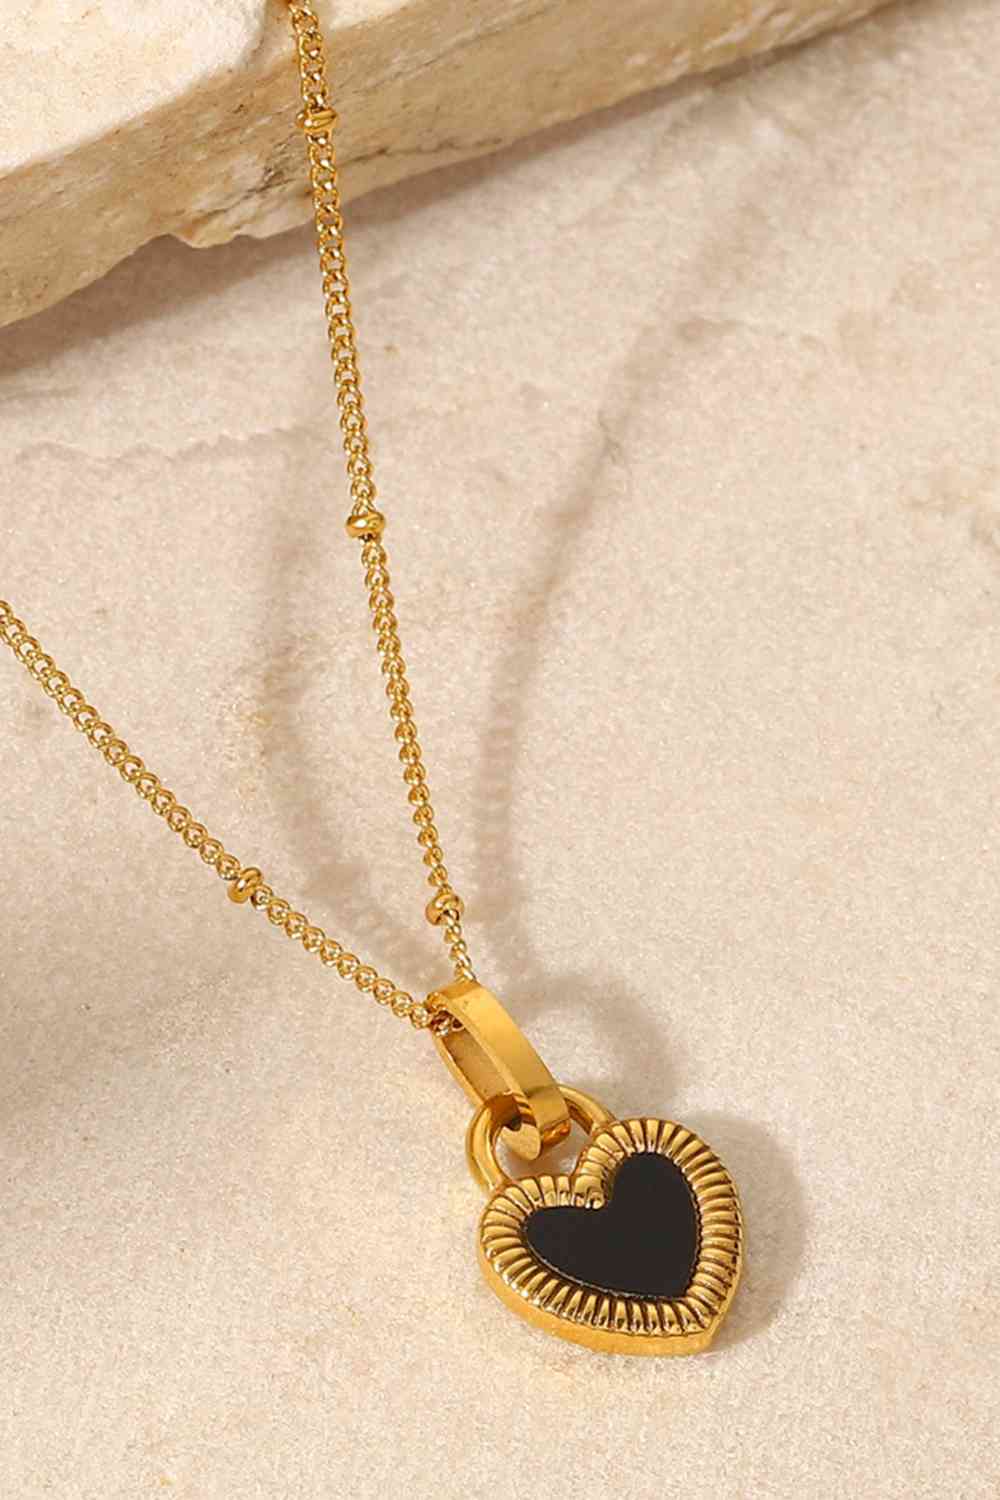 Heart Pendant Necklace - Unique Elegance for a Timeless Style